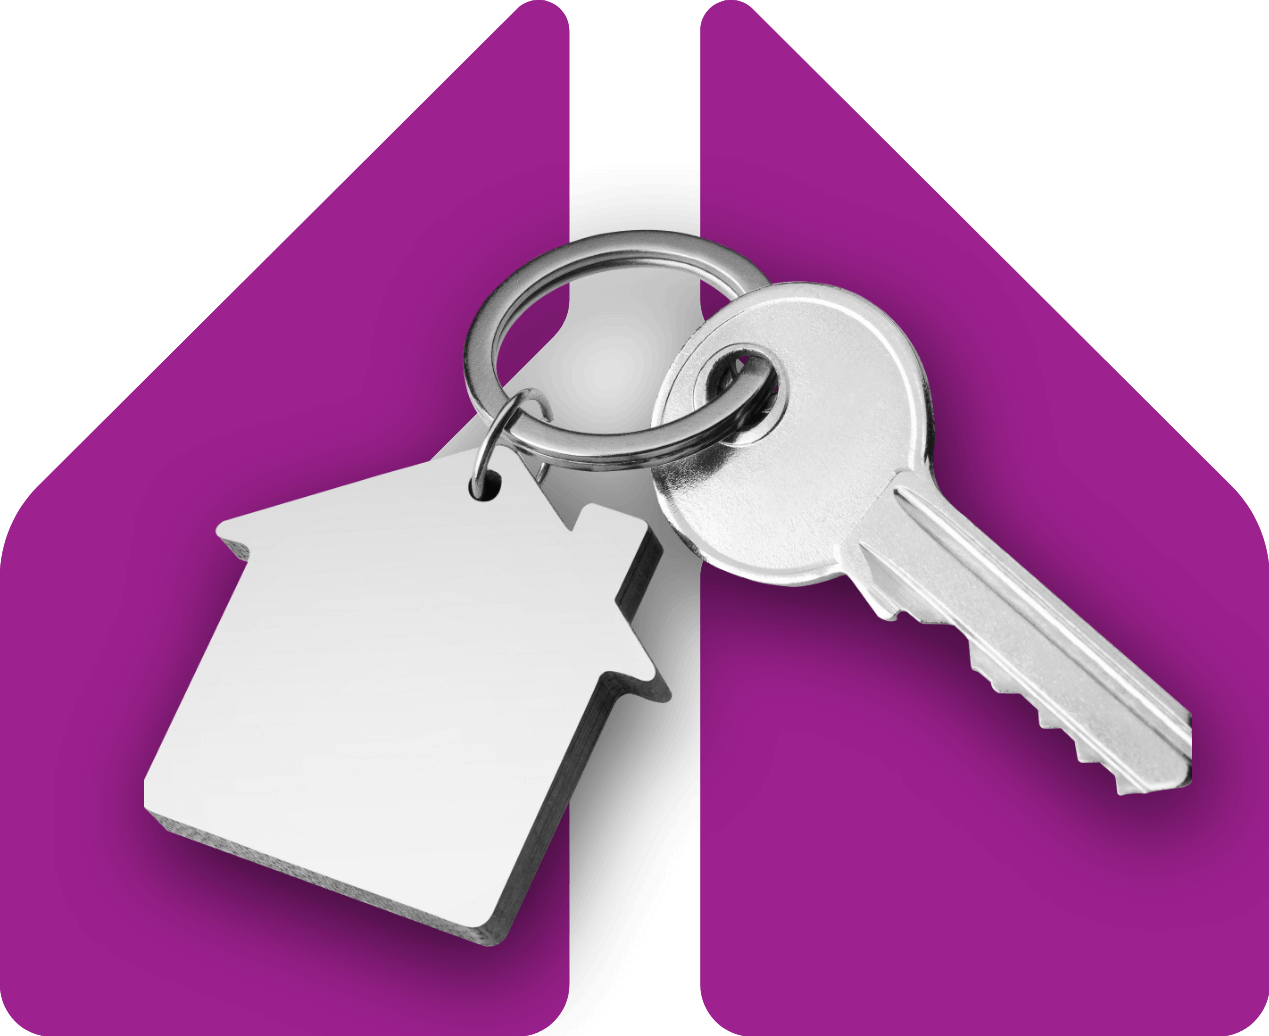 Image showing a set of keys with a house keyring in a pair of speech marks